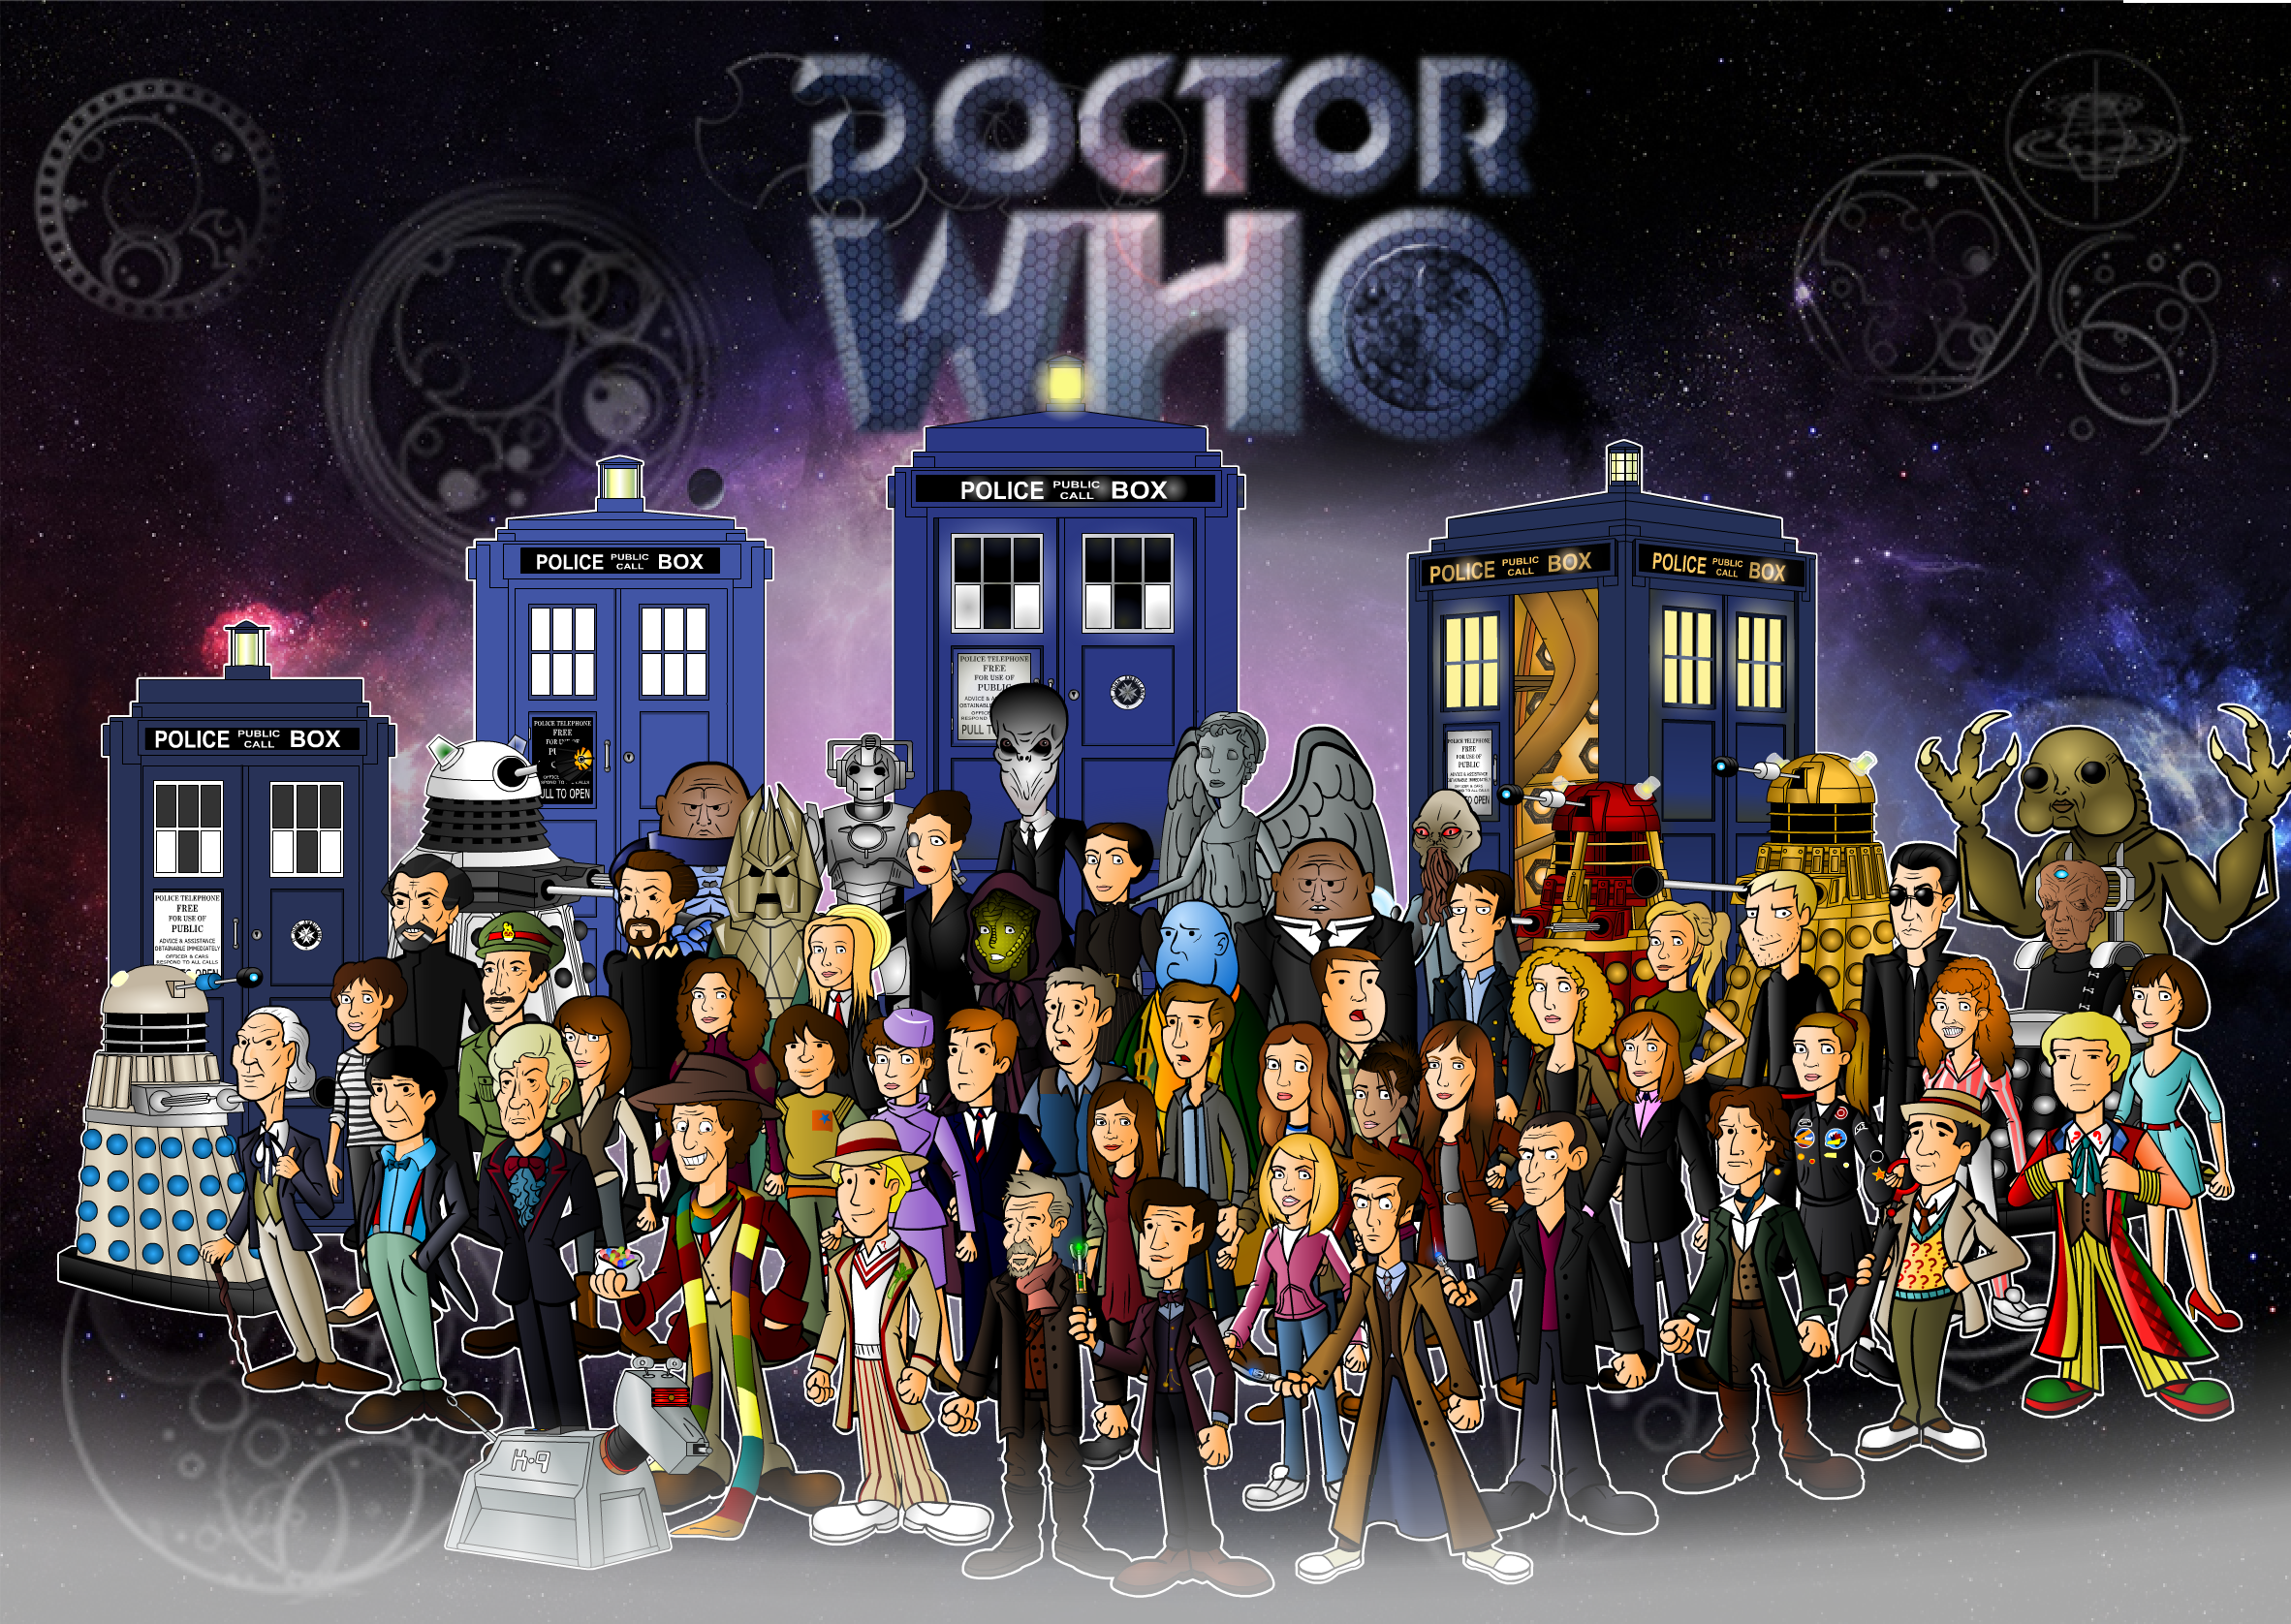 All Doctors Wallpaper Doctor Who 50th Anniversary By